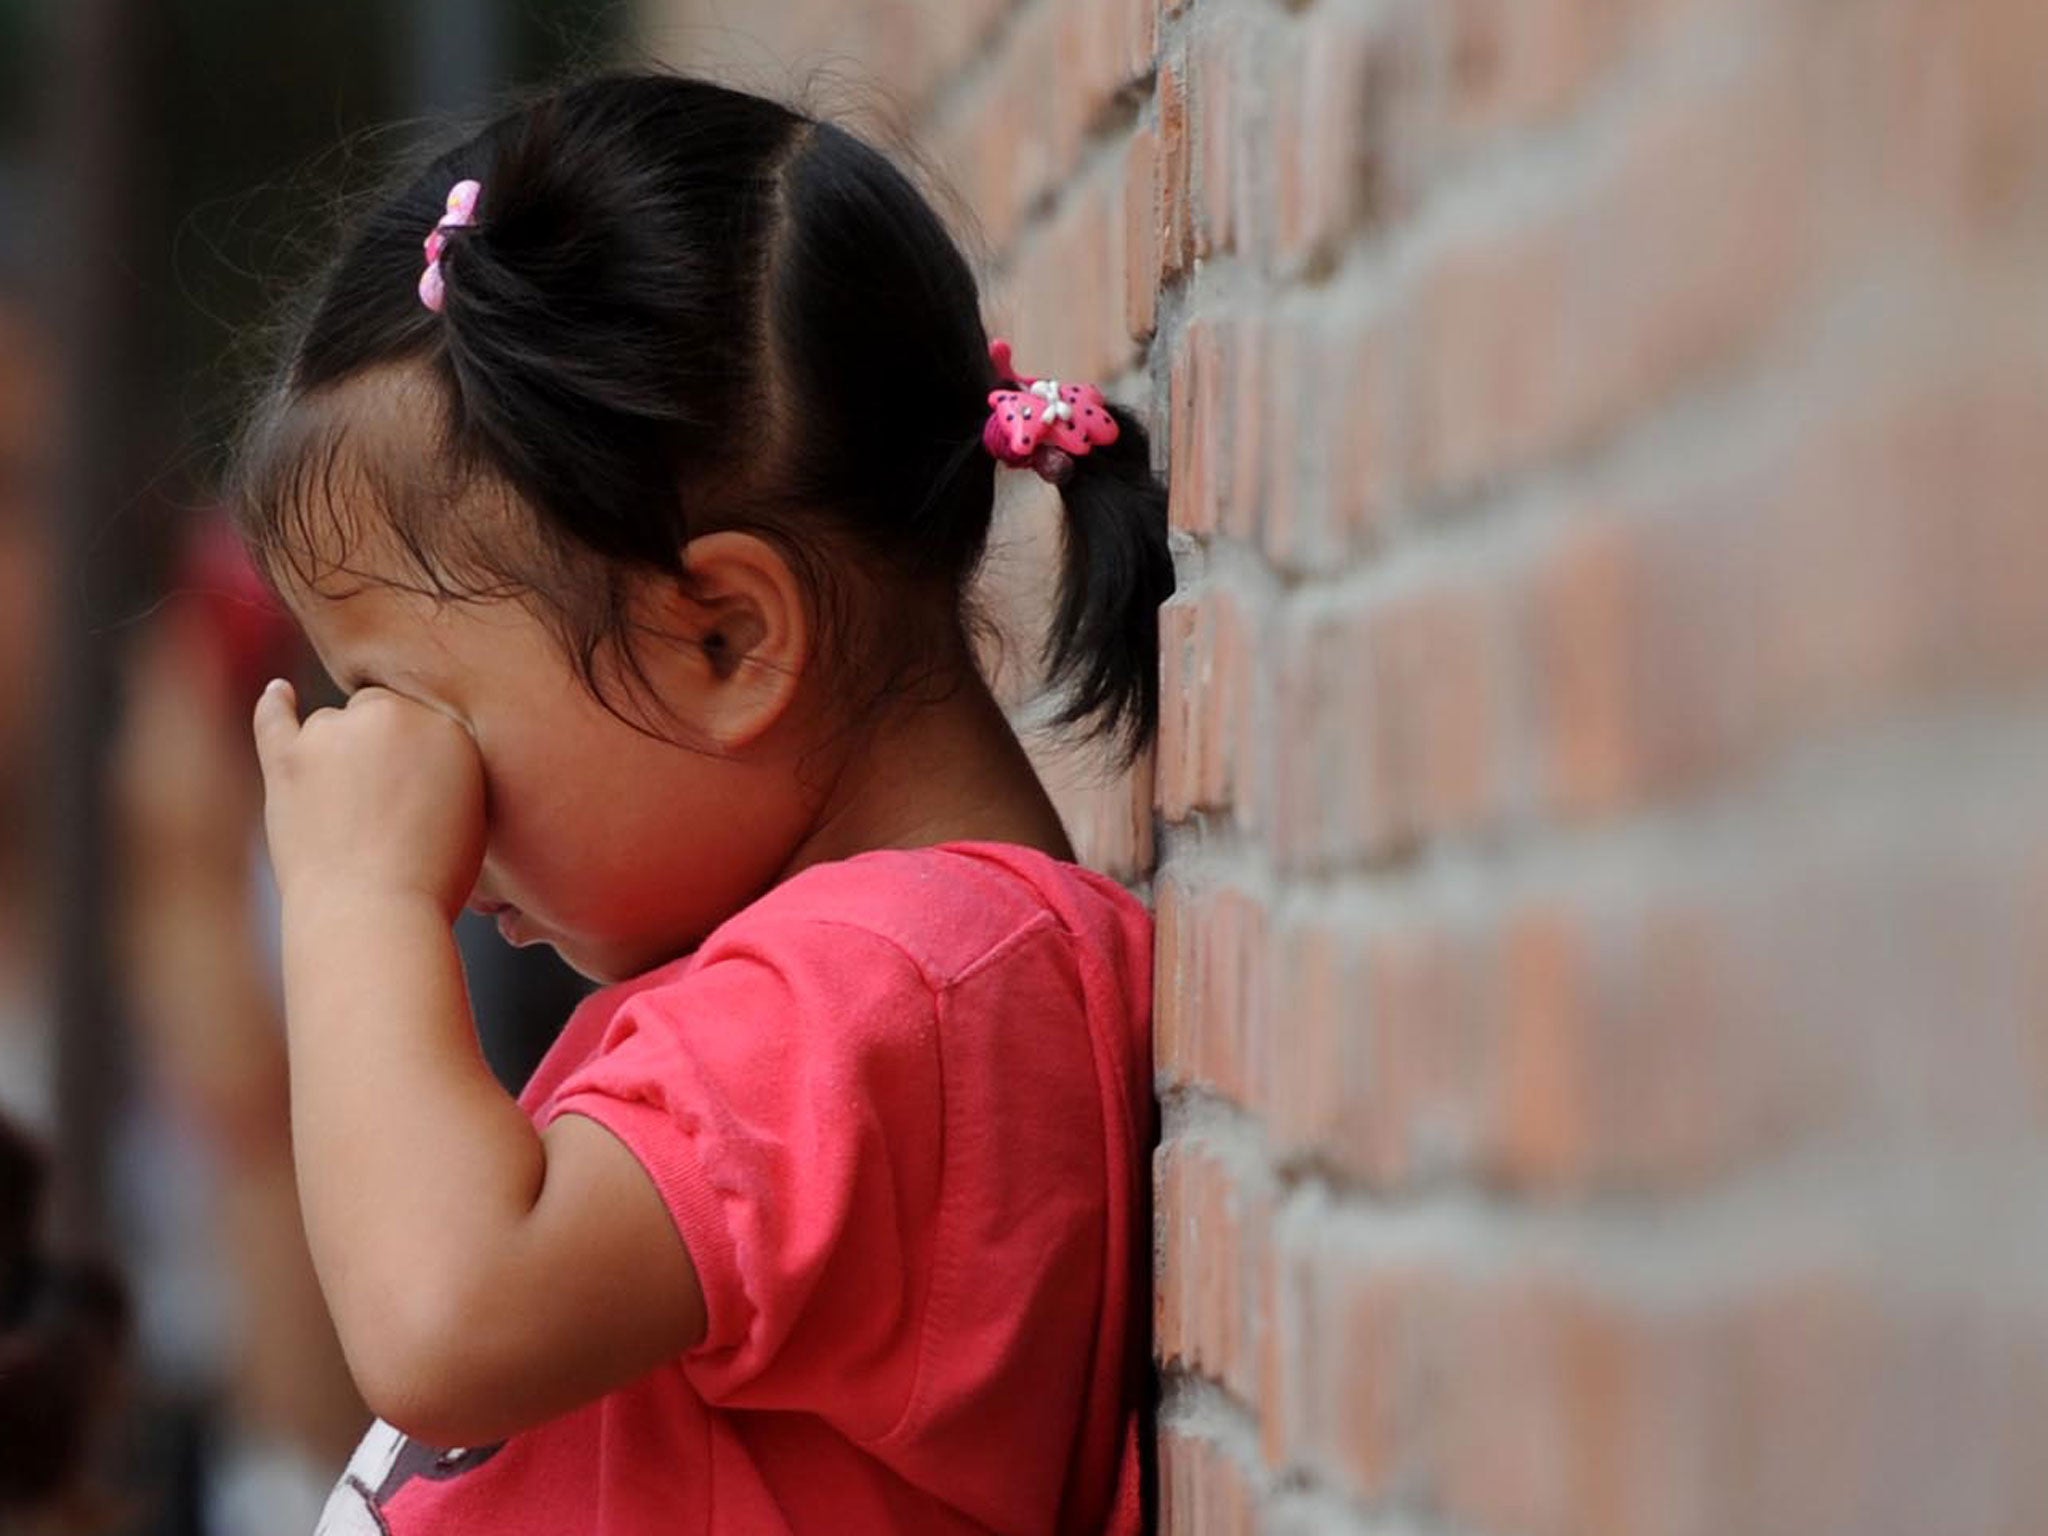 A child cries against a wall (image posed by model)